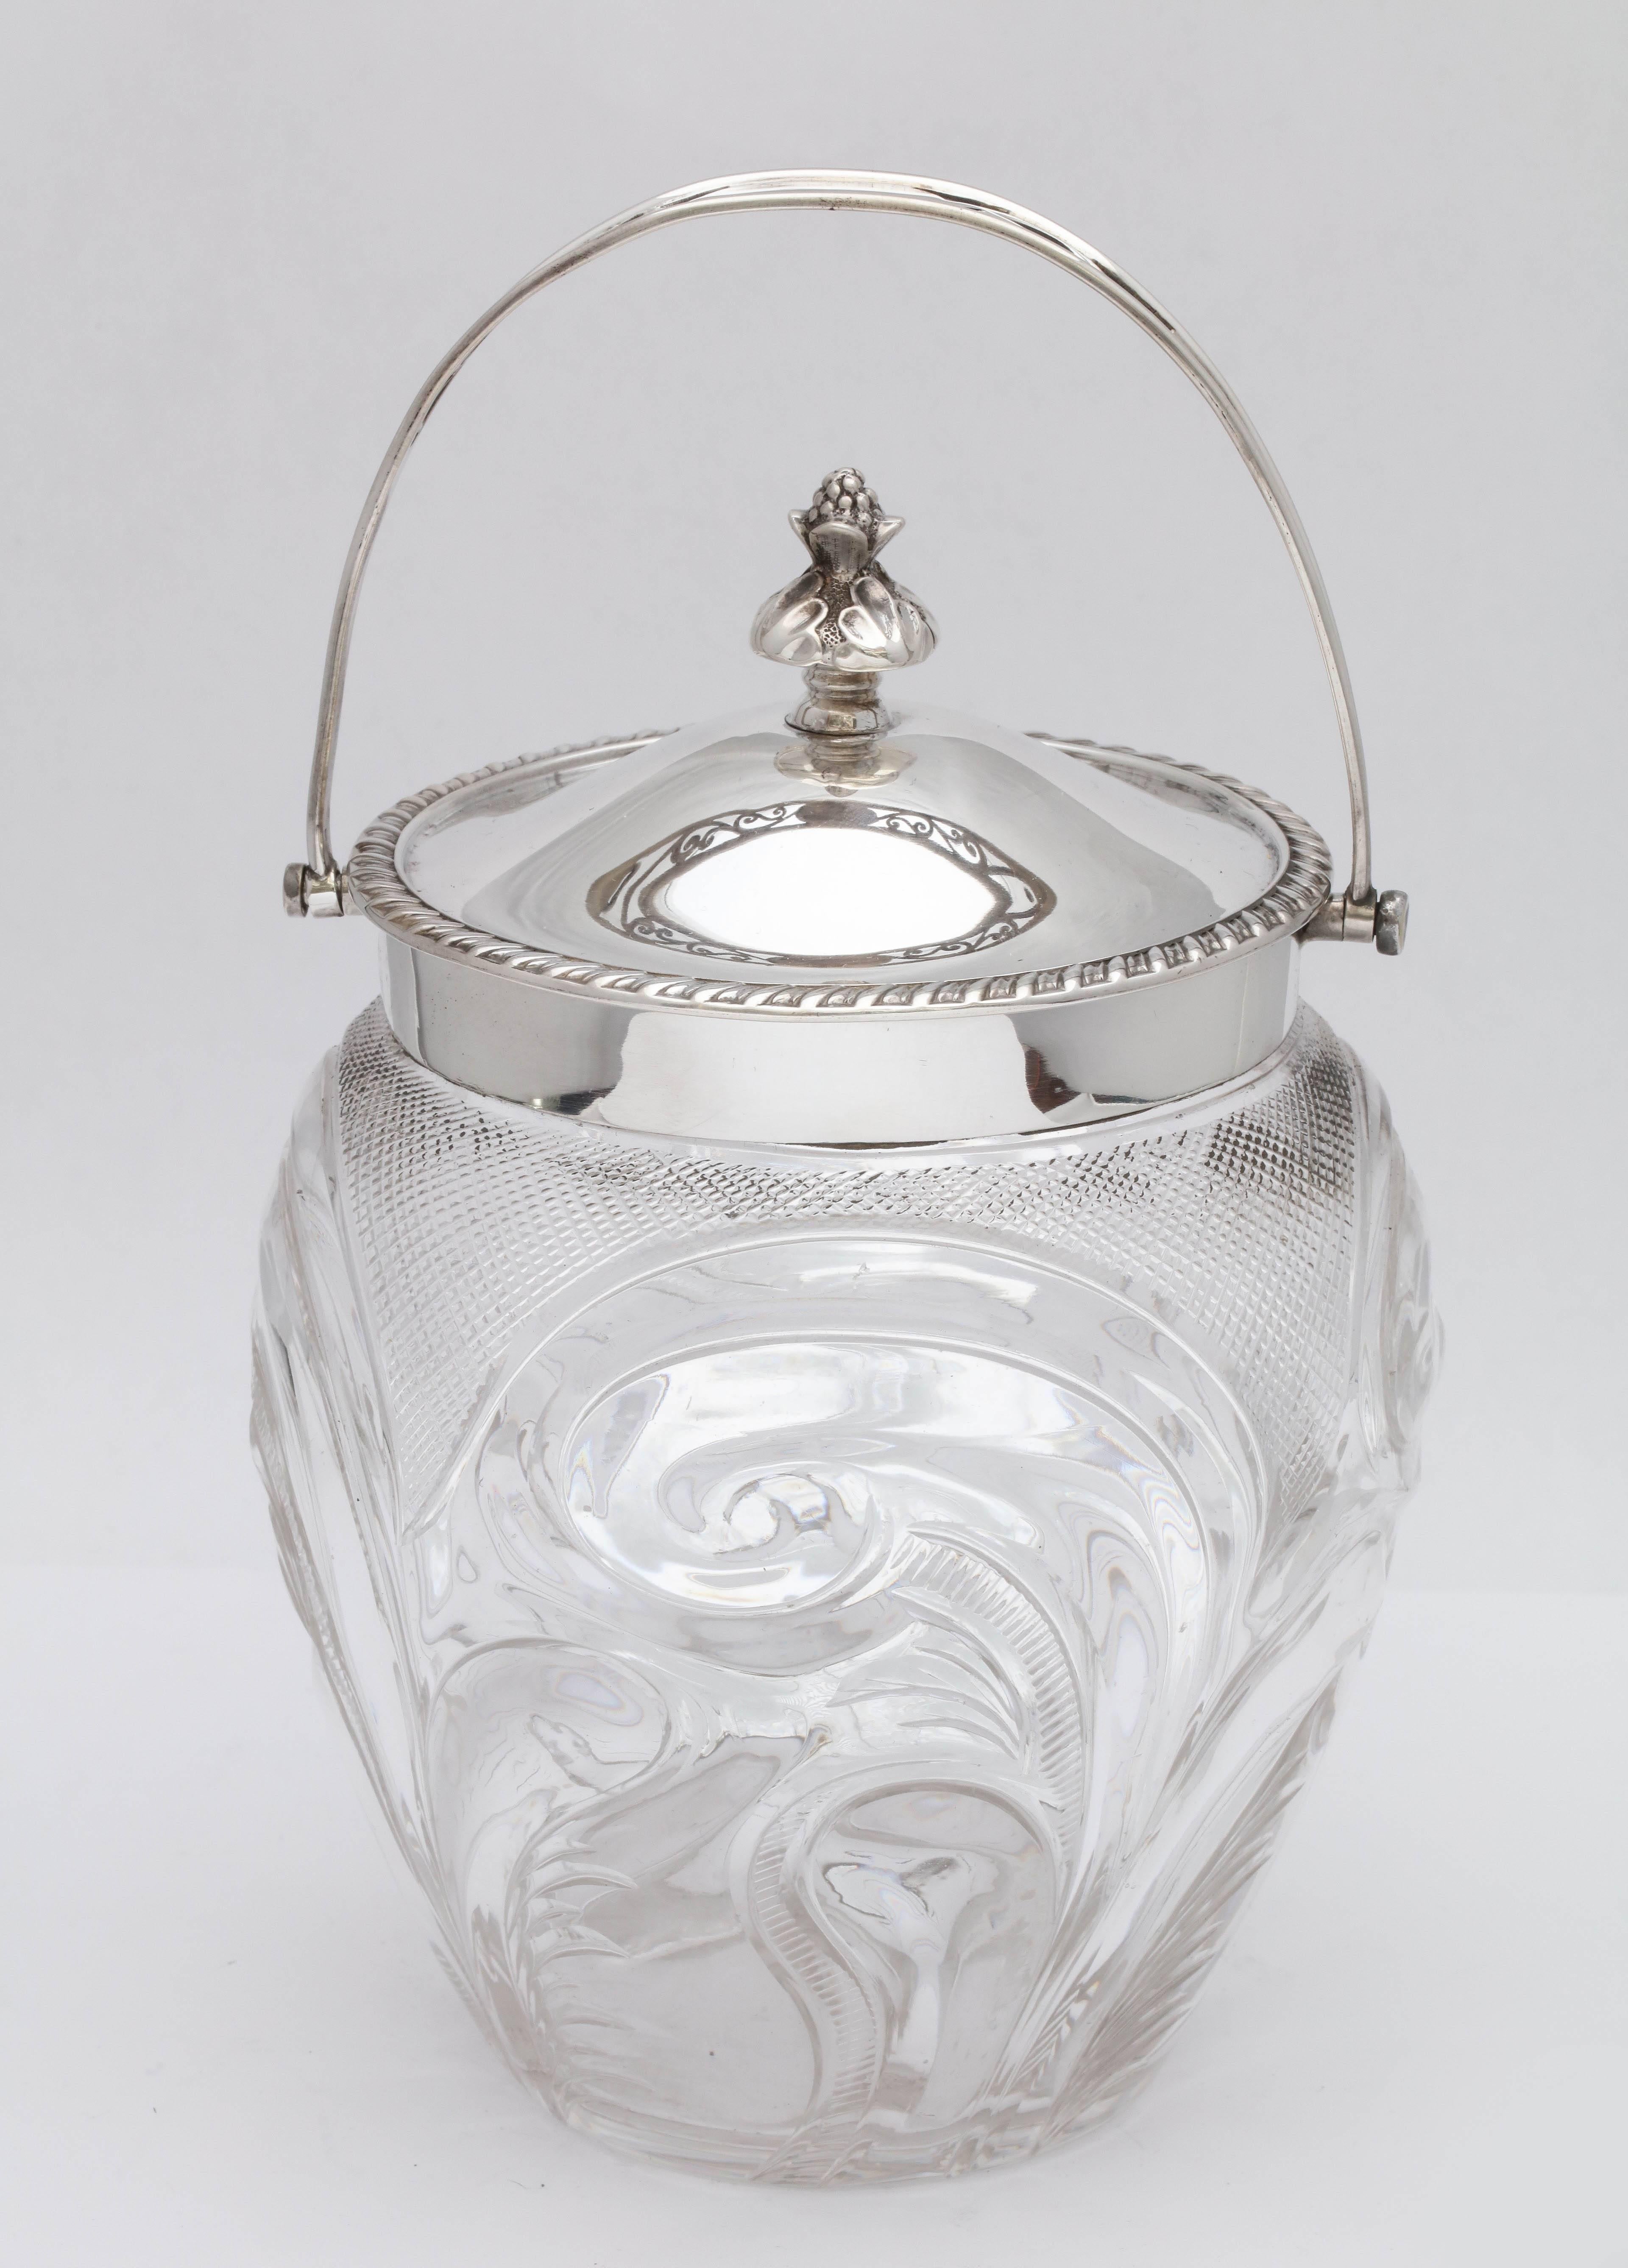 English Edwardian Sterling Silver-Mounted Cut Glass Biscuit Barrel or Ice Bucket